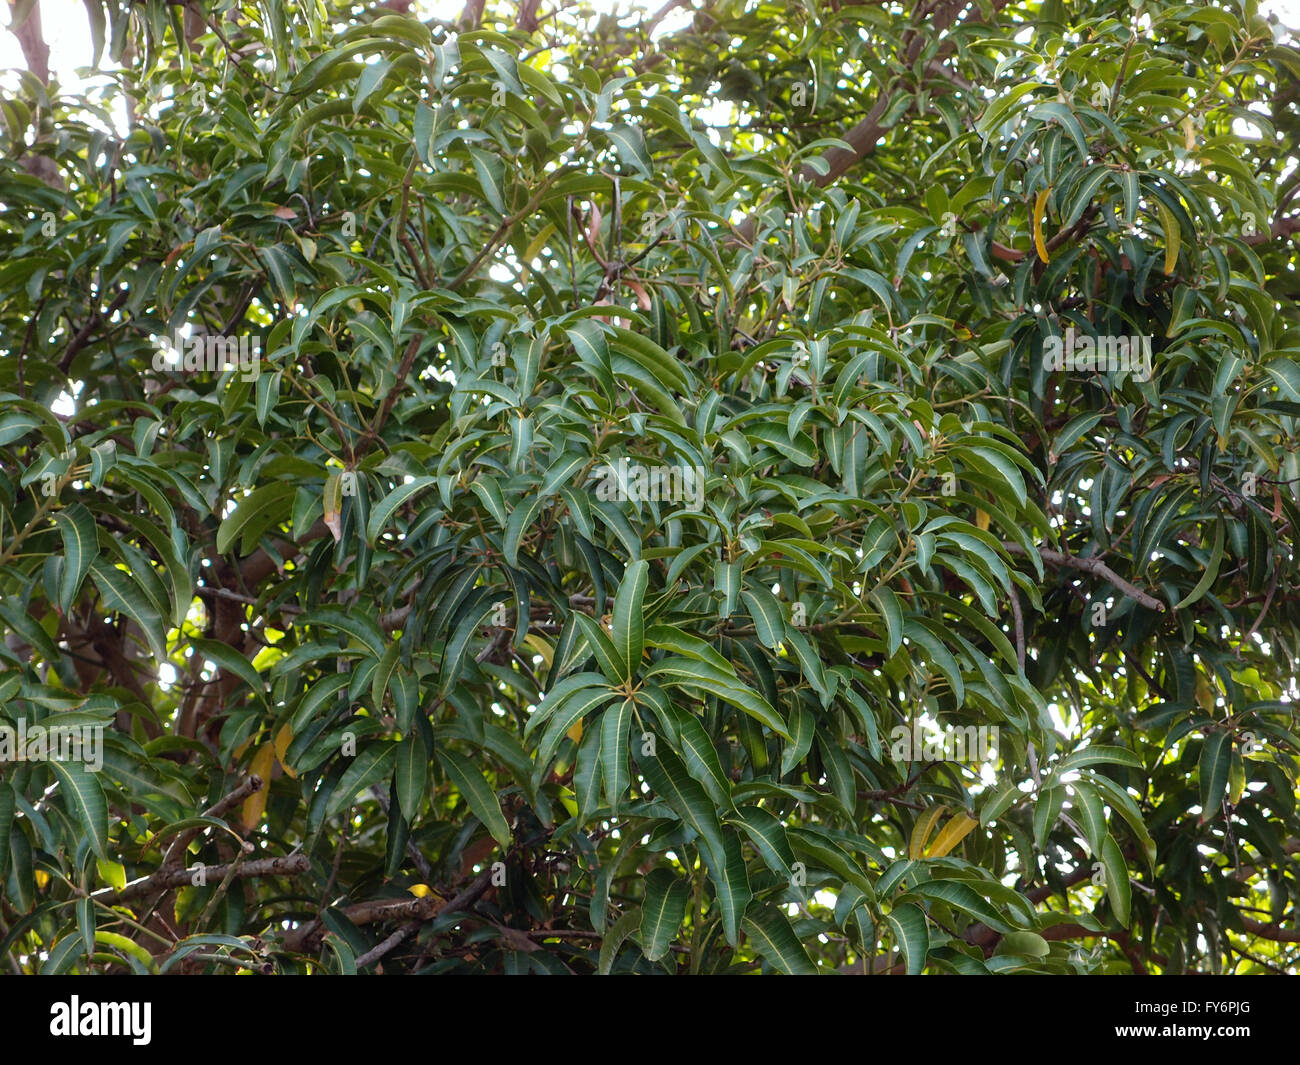 Leafs and branches of a mango tree out of season. Stock Photo